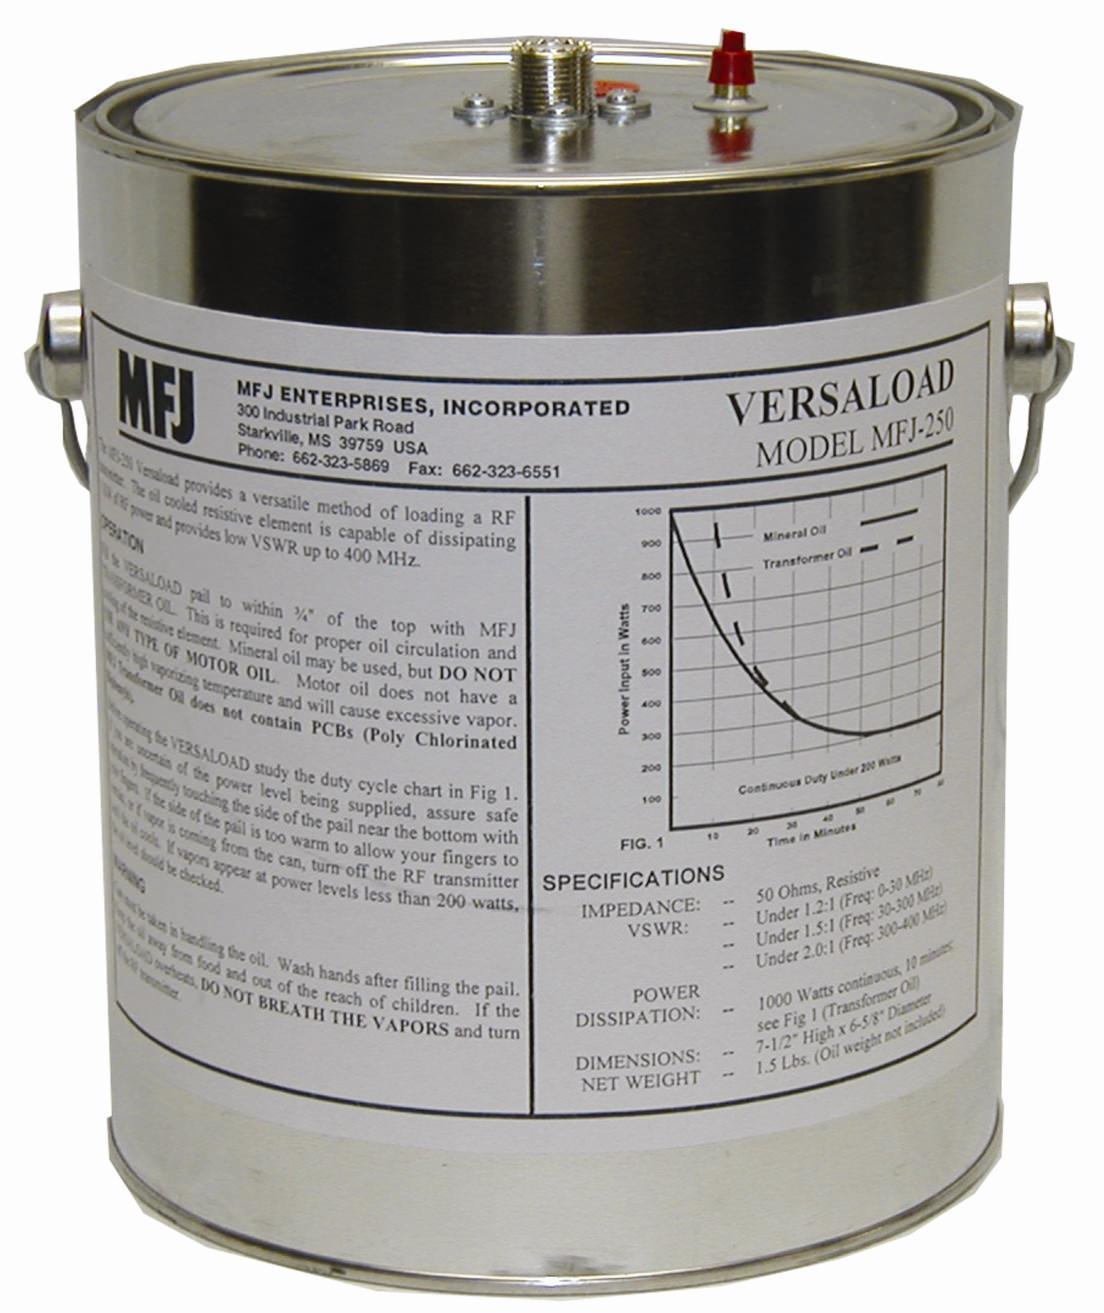 VEC-554X Vectronics 1500W 0-400W Wet Dummy Load in can